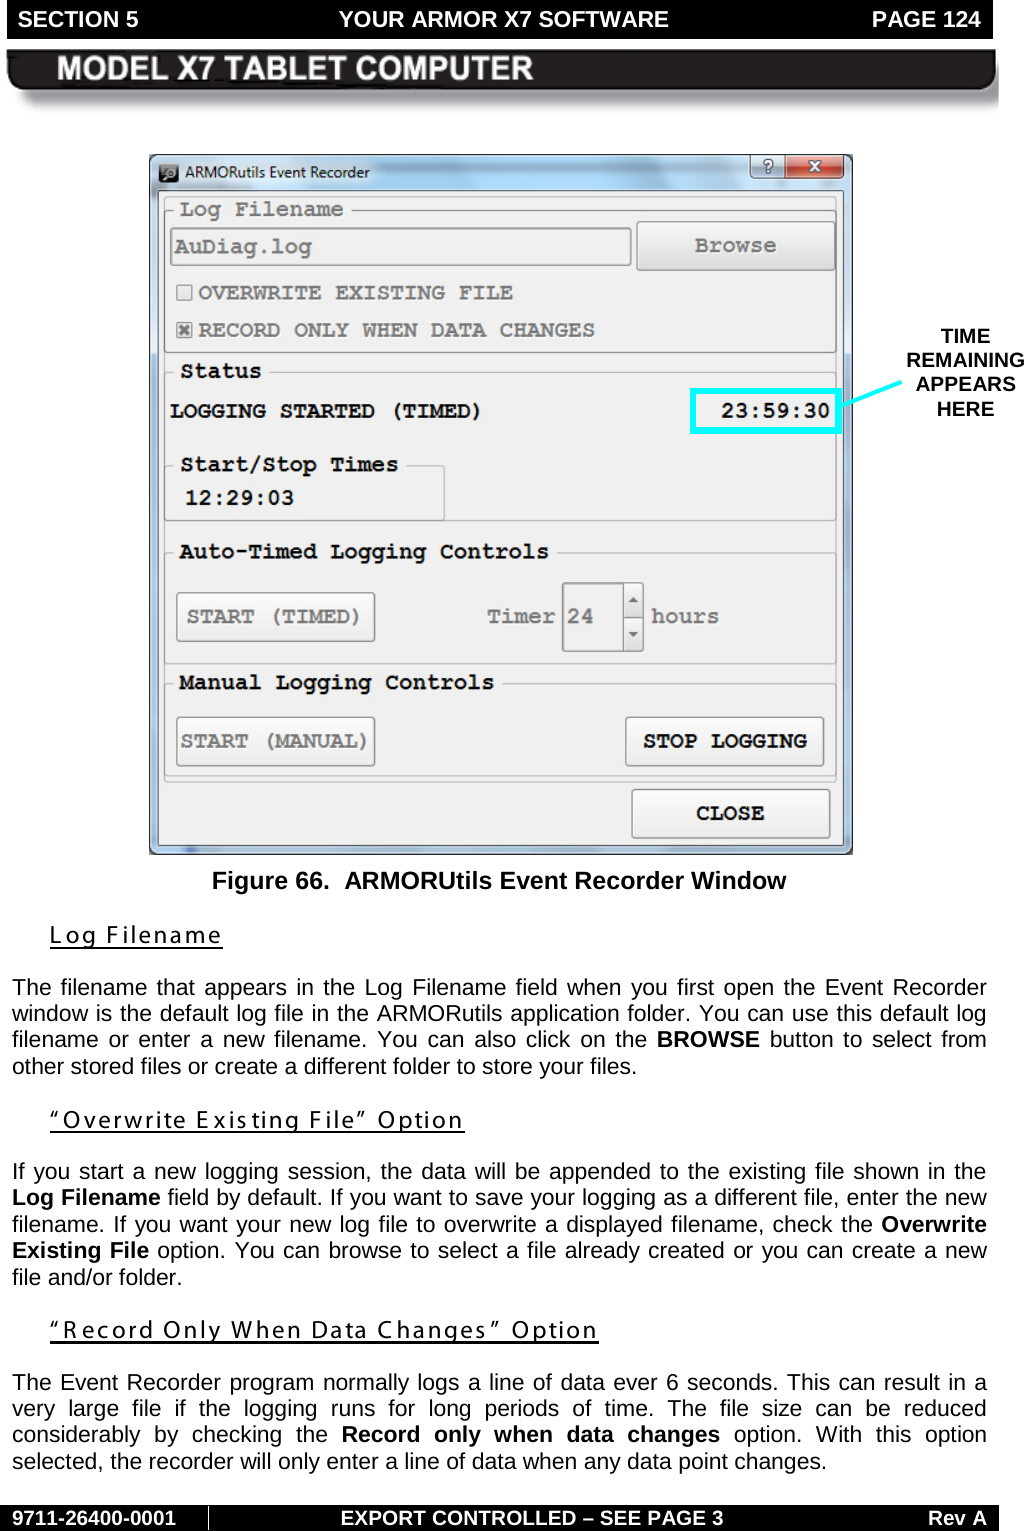 SECTION 5 YOUR ARMOR X7 SOFTWARE  PAGE 124        9711-26400-0001 EXPORT CONTROLLED – SEE PAGE 3 Rev A   Figure 66.  ARMORUtils Event Recorder Window  Log Filename The filename that appears in the Log Filename field when you first open the Event Recorder window is the default log file in the ARMORutils application folder. You can use this default log filename or enter a new filename. You can also click on the BROWSE button to select from other stored files or create a different folder to store your files. “Overwrite E xis ting File”  Option If you start a new logging session, the data will be appended to the existing file shown in the Log Filename field by default. If you want to save your logging as a different file, enter the new filename. If you want your new log file to overwrite a displayed filename, check the Overwrite Existing File option. You can browse to select a file already created or you can create a new file and/or folder.  “R ecord Only When Data Changes ” Option The Event Recorder program normally logs a line of data ever 6 seconds. This can result in a very large file if the logging runs for long periods of time.  The file size can be reduced considerably by checking the Record only when data changes option.  With this option selected, the recorder will only enter a line of data when any data point changes.  TIME REMAINING APPEARS HERE 